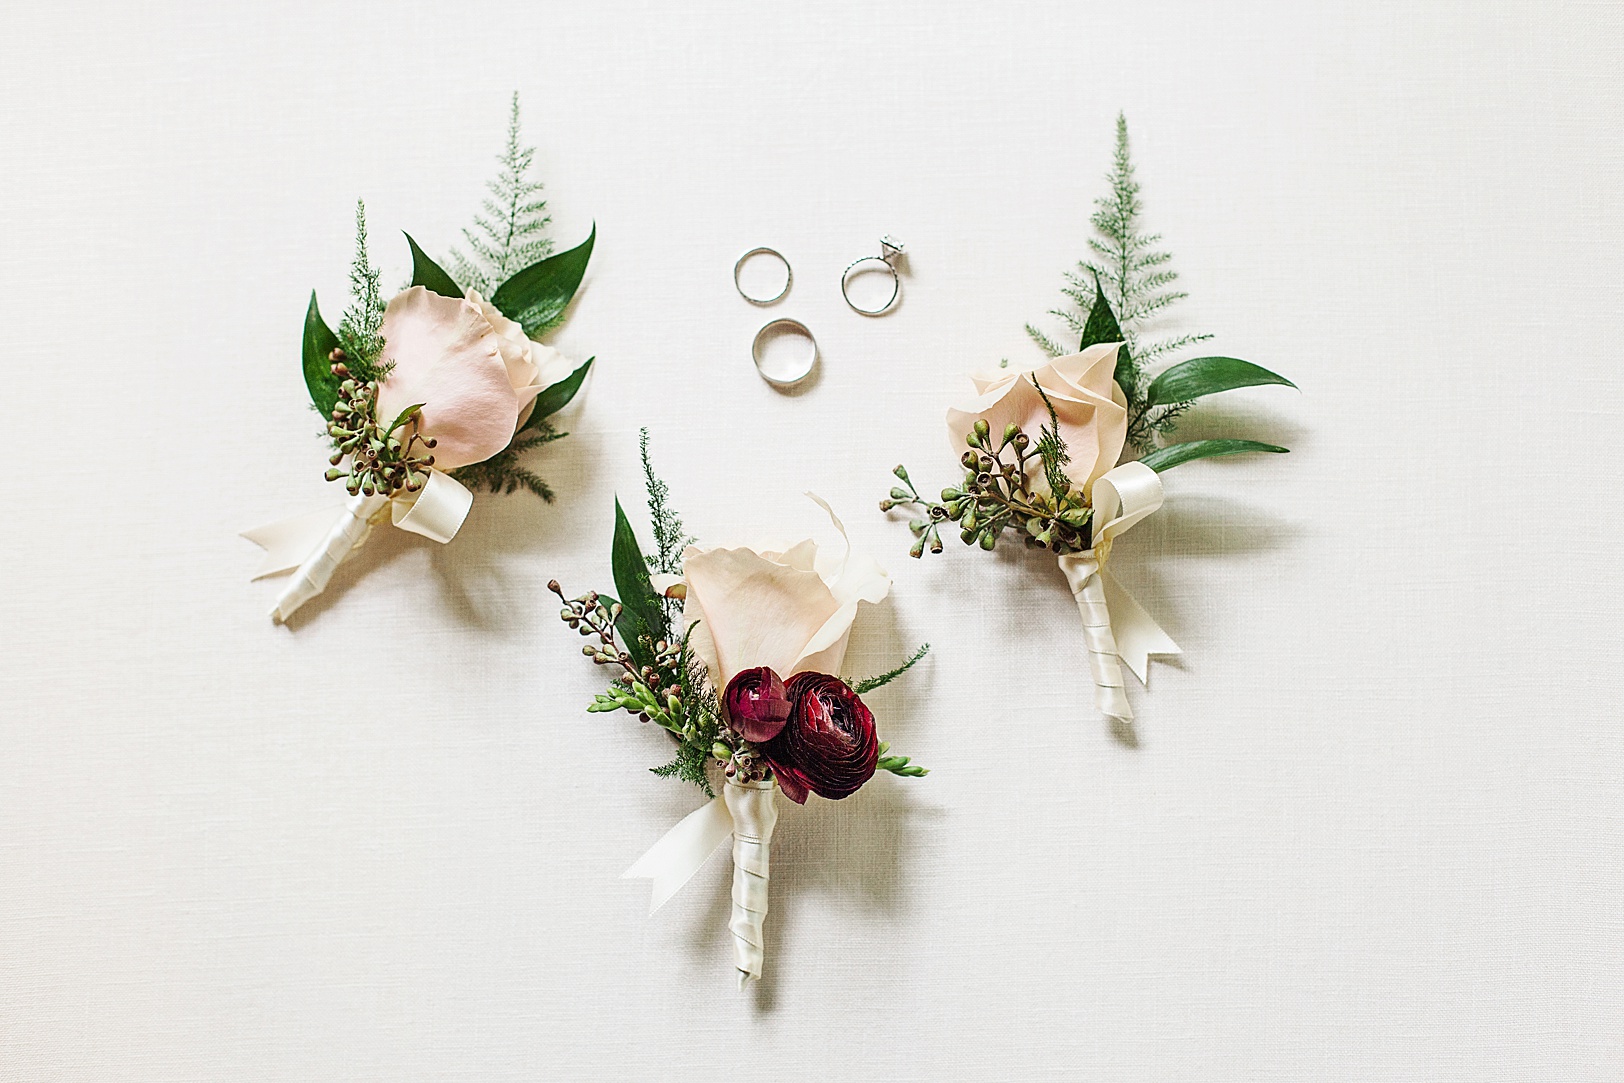 Wedding Details Rose Boutonniere and Rings | Charleston Photographer Kaitlin Scott